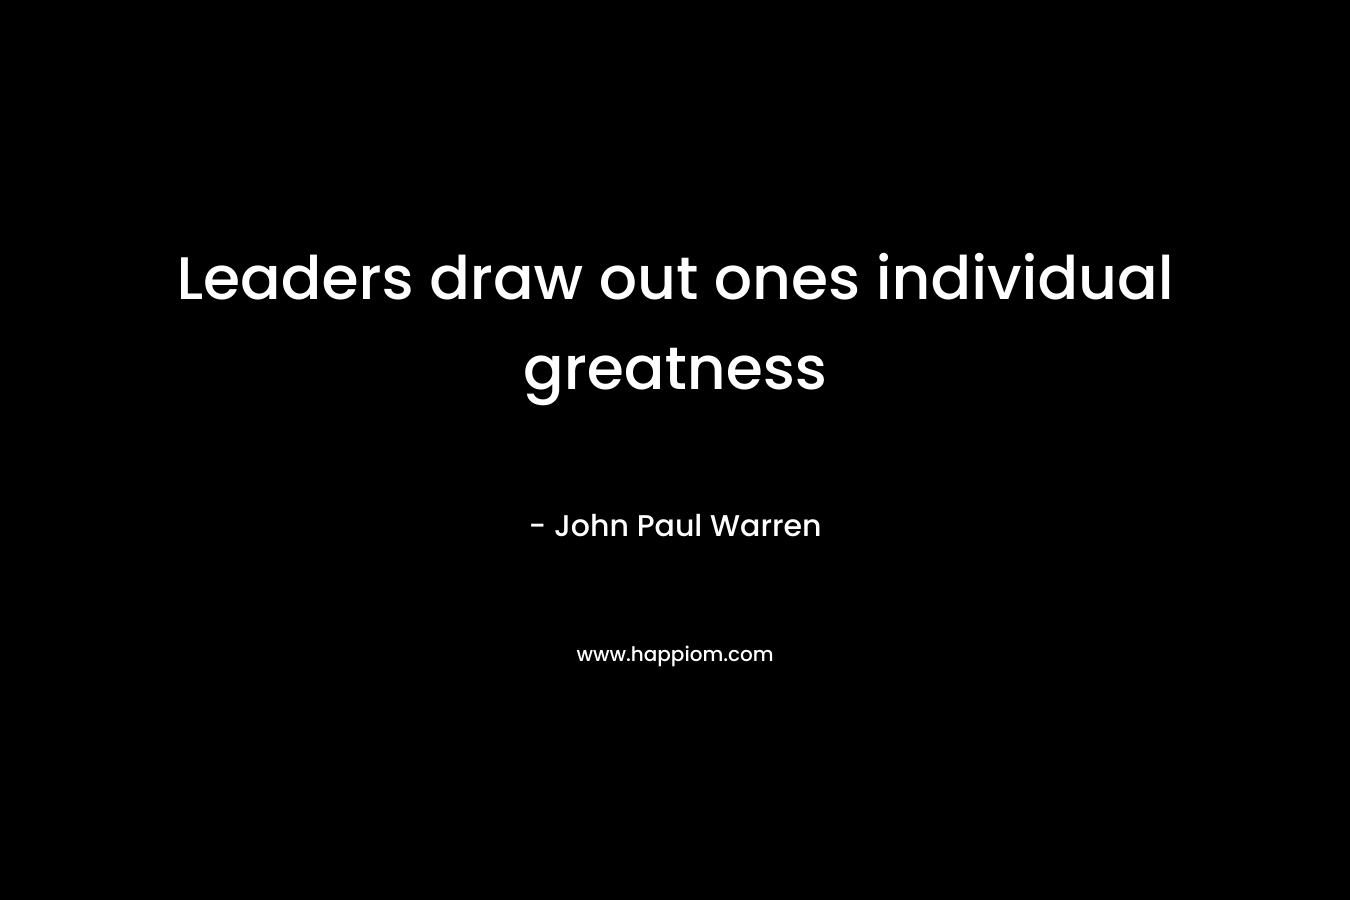 Leaders draw out ones individual greatness